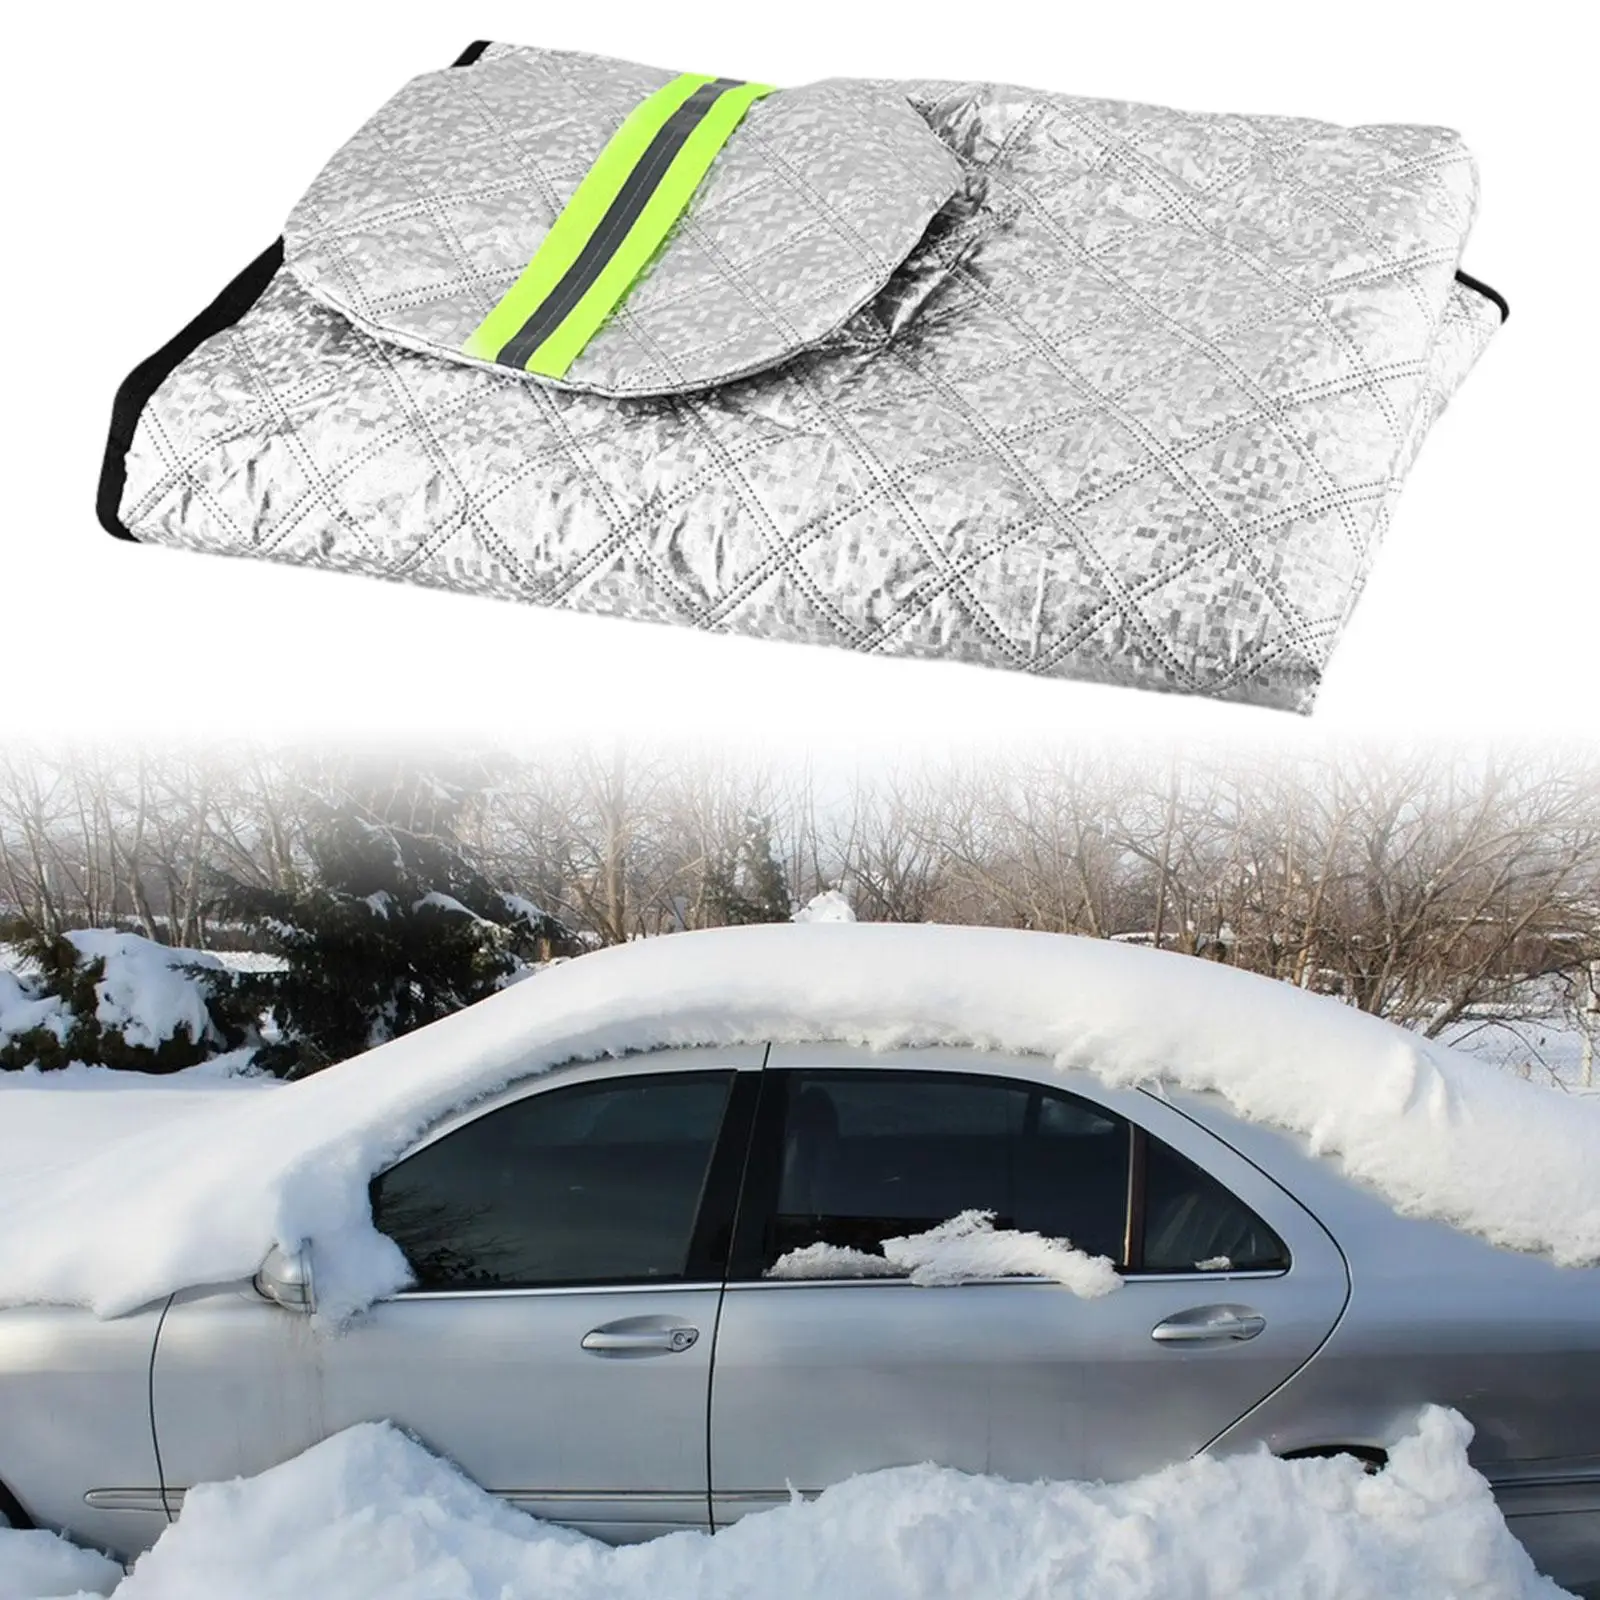 Car Windshield Cover Mirror Protector Compact Thickened Waterproof Windproof Windshield Frost Cover for Rvs SUV Van Trucks